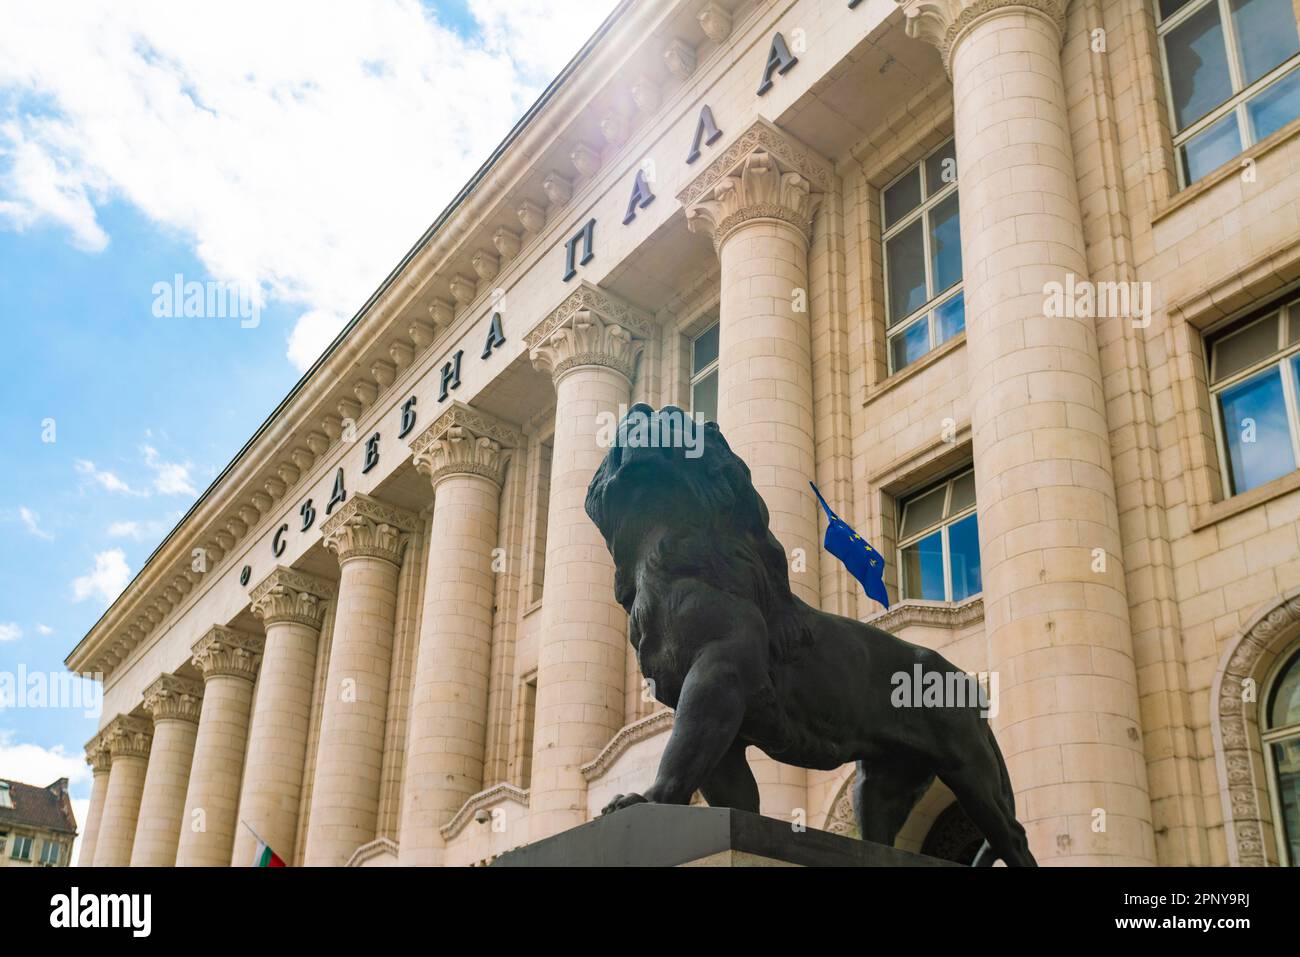 The Building of Court House and a bronze lion in Sofia, Bulgaria Stock Photo